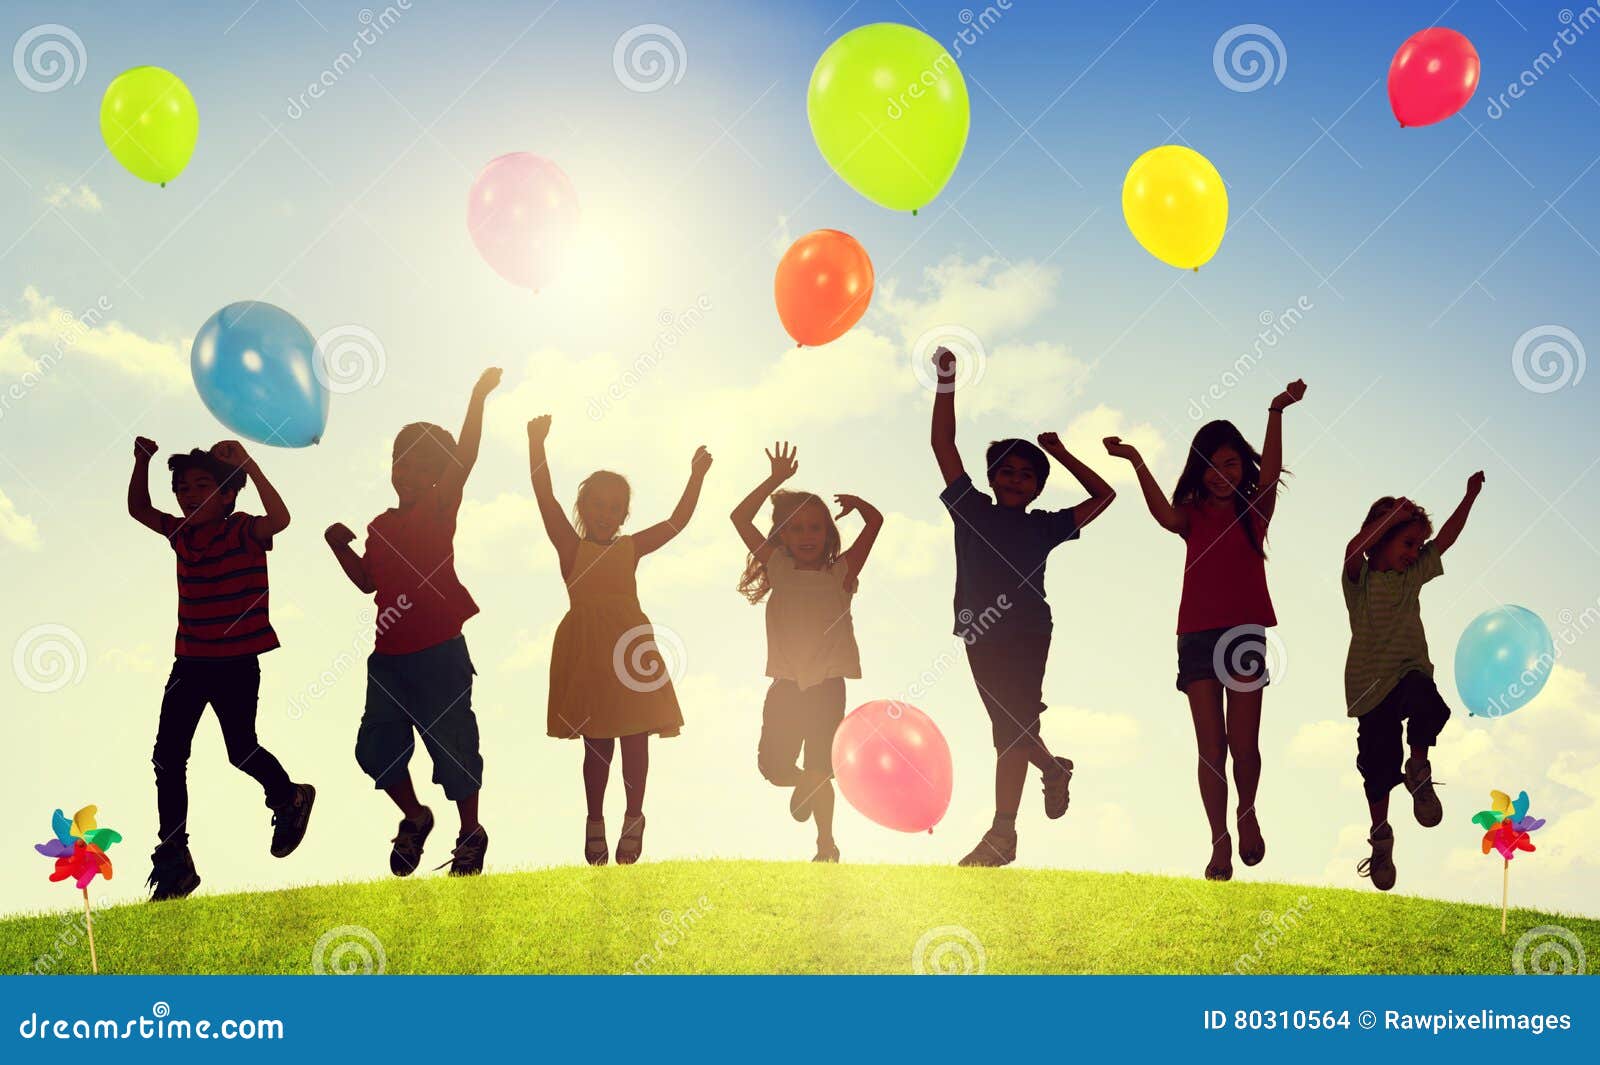 children outdoors playing balloons togetherness concept